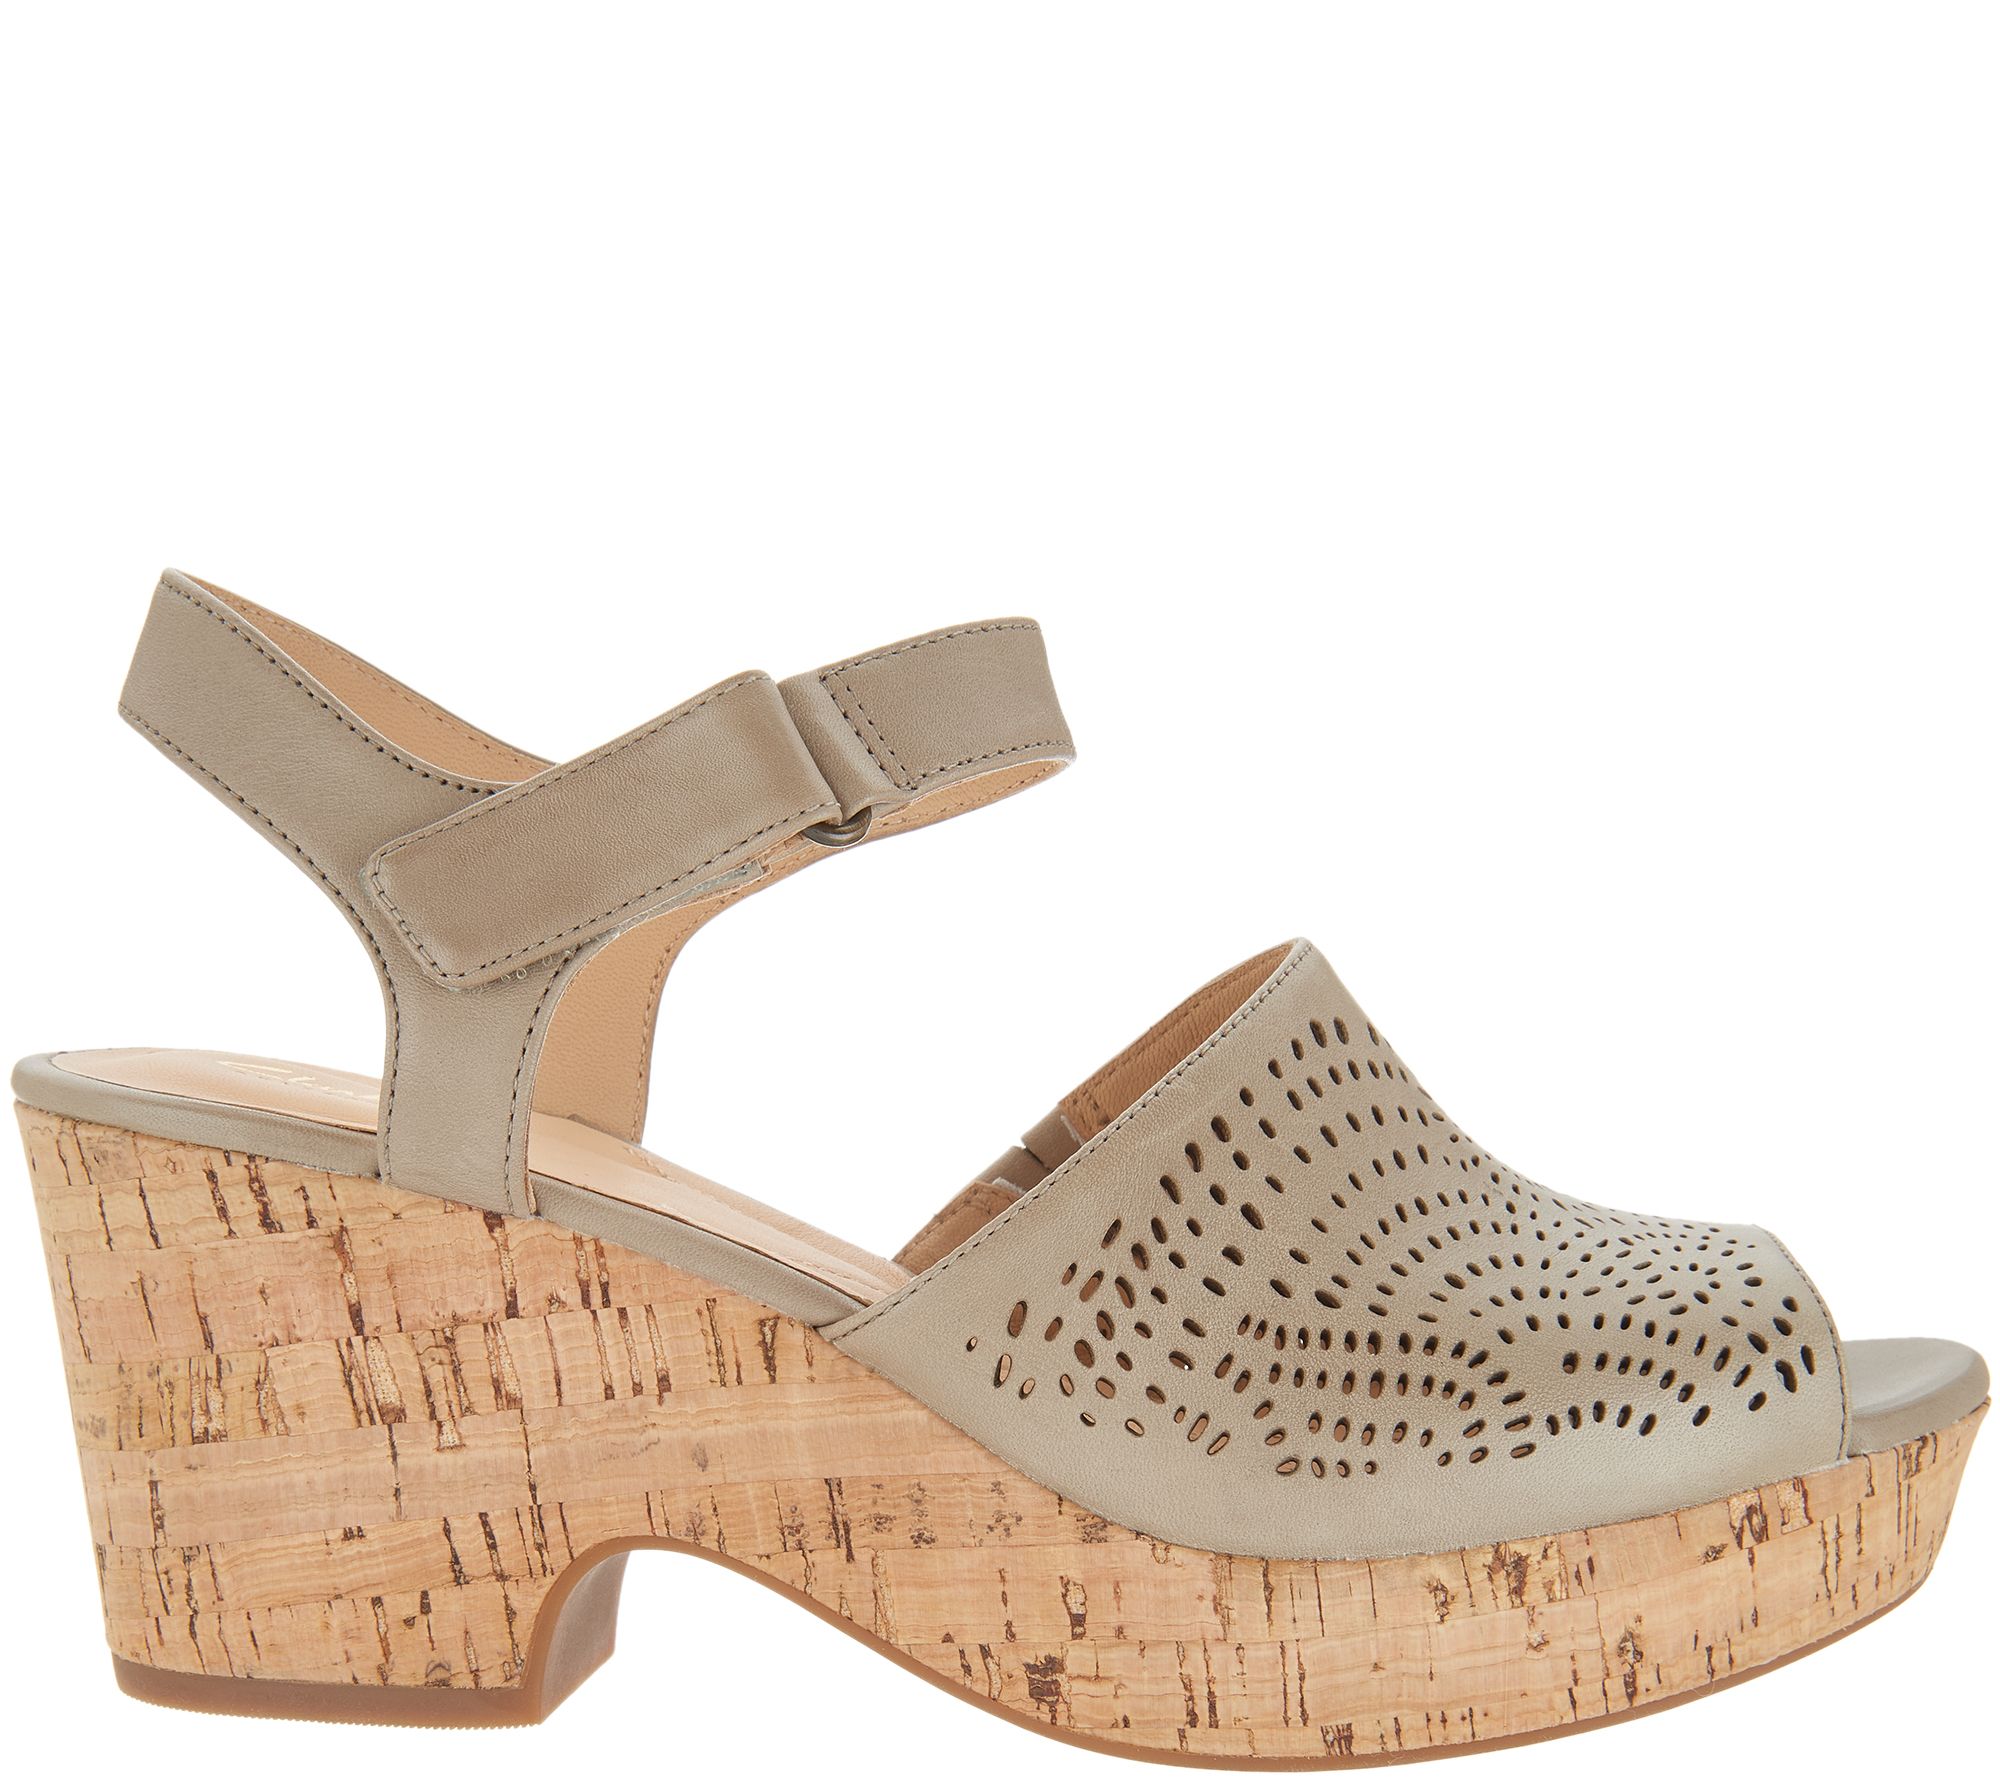 Clarks Artisan Perforated Leather Wedge 